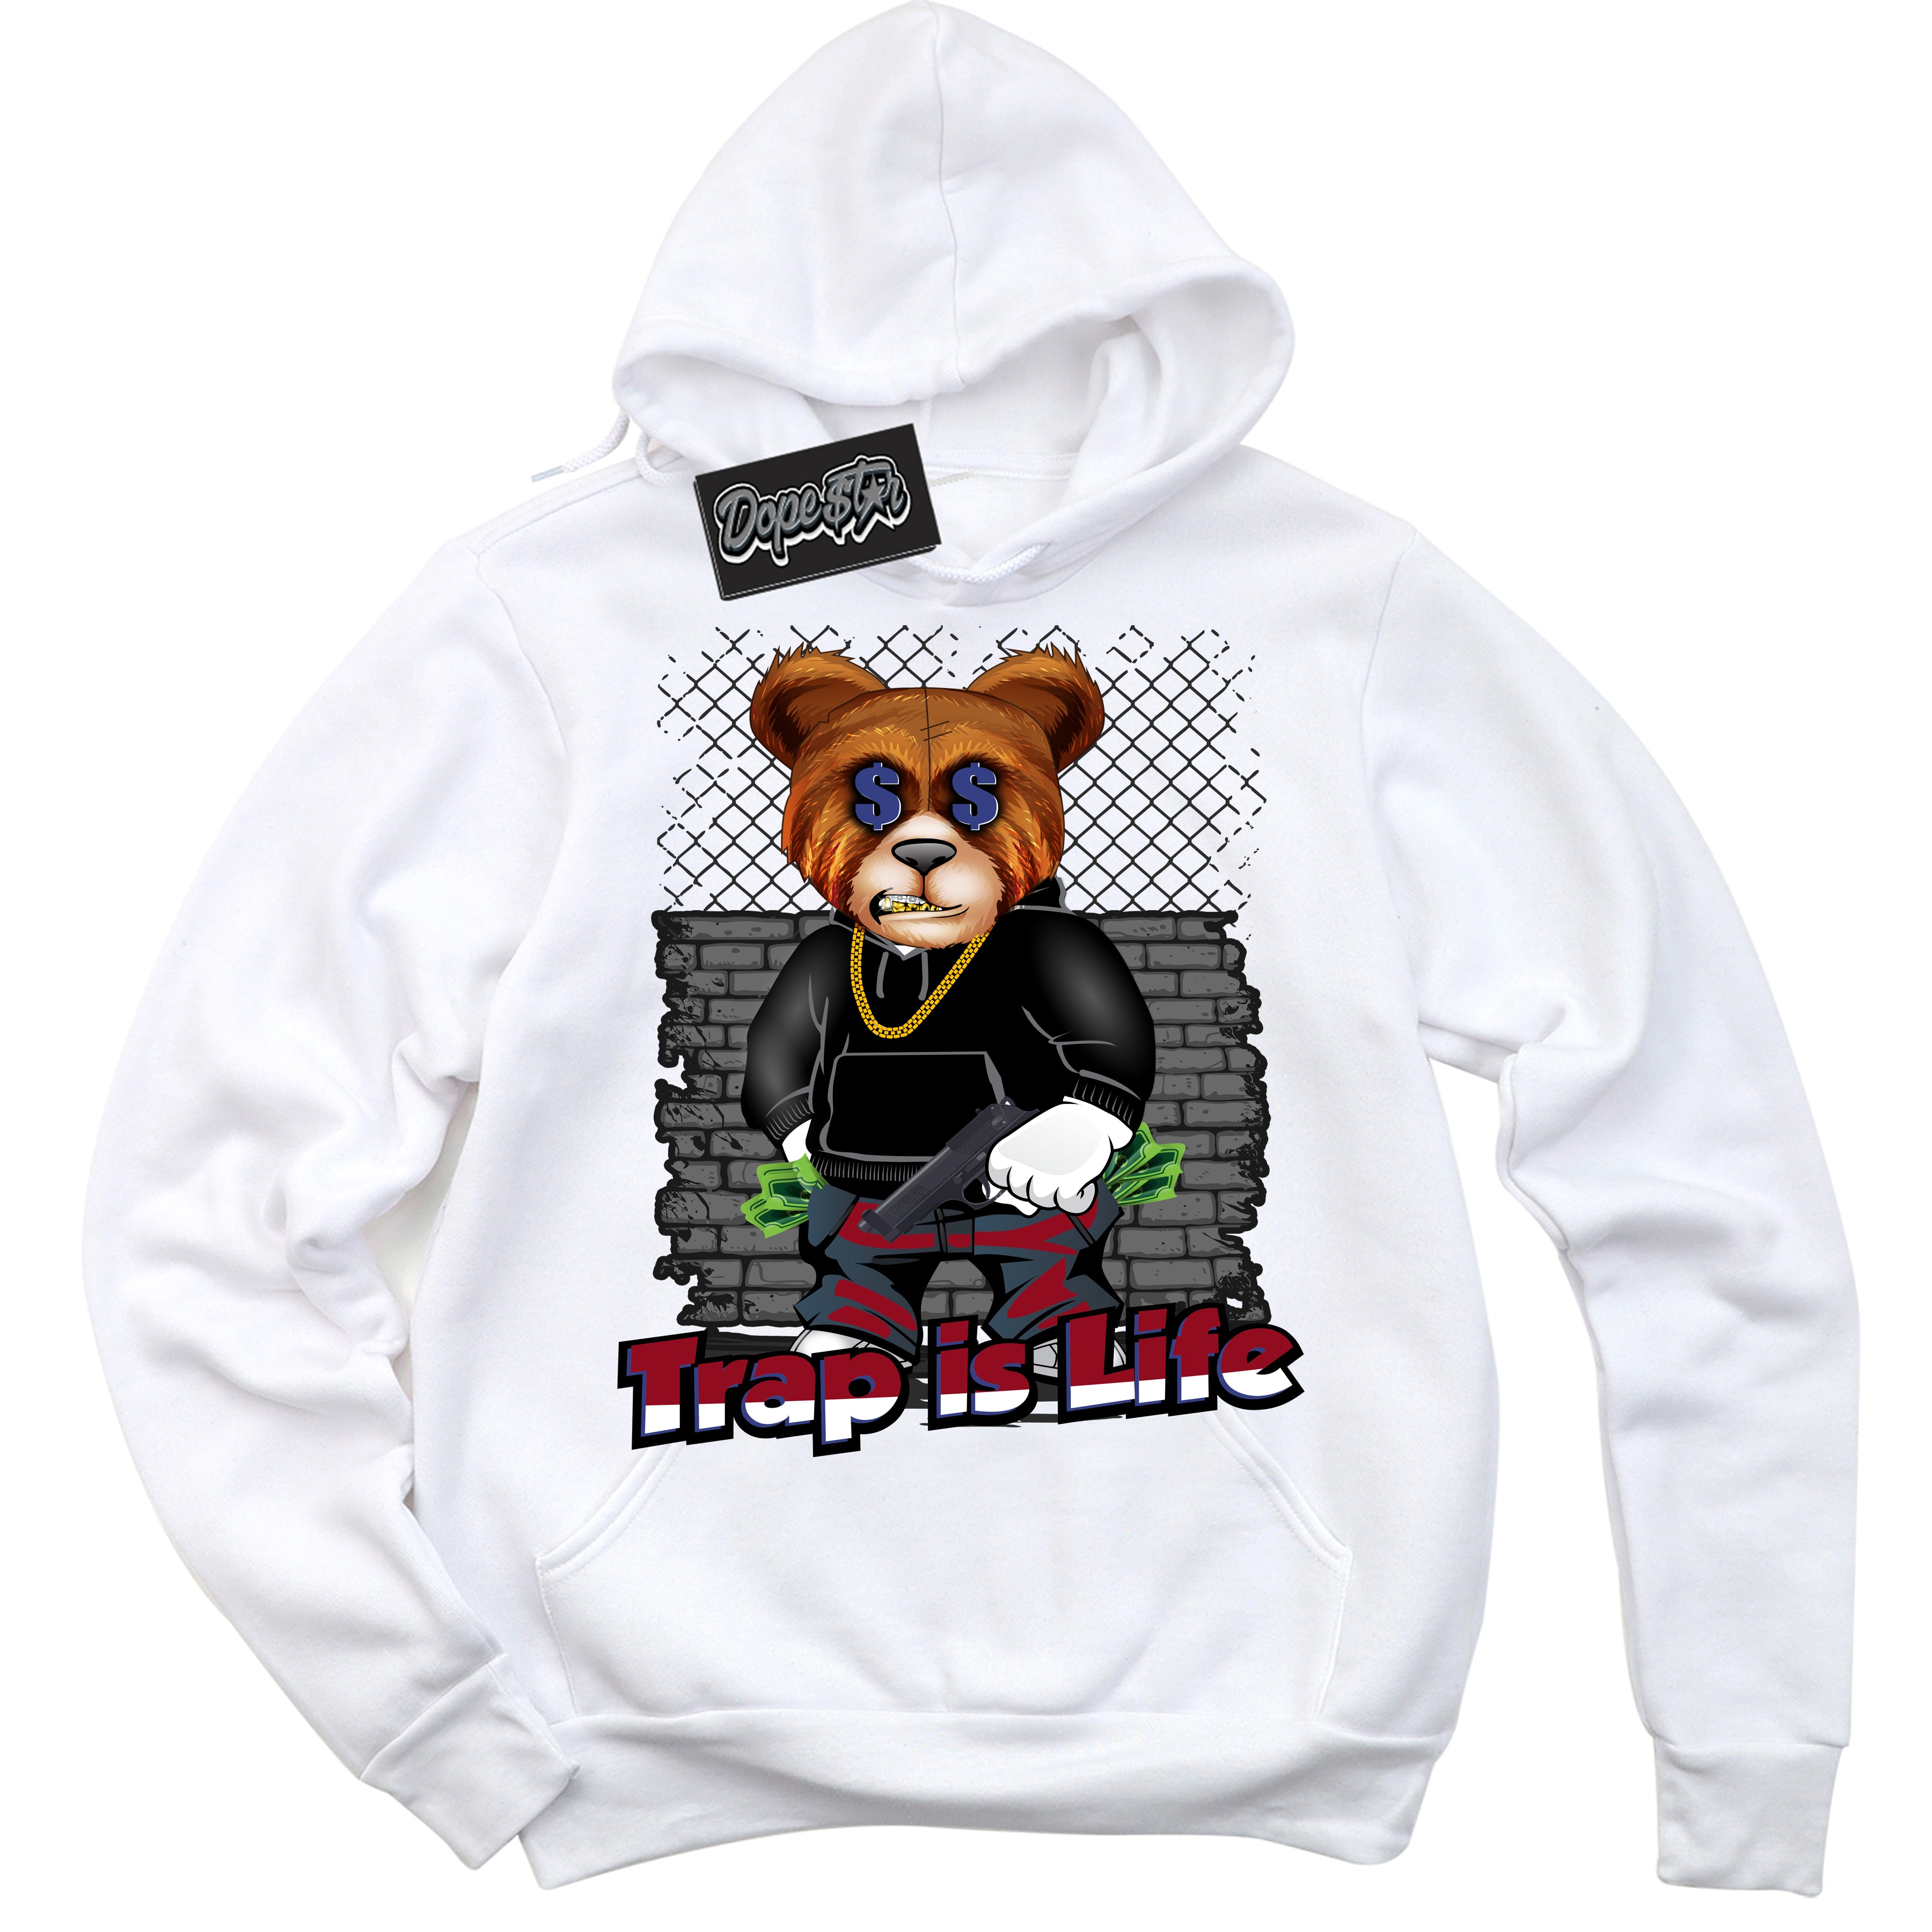 Cool White Hoodie with “ Trap Is Life ”  design that Perfectly Matches Playoffs 8s Sneakers.